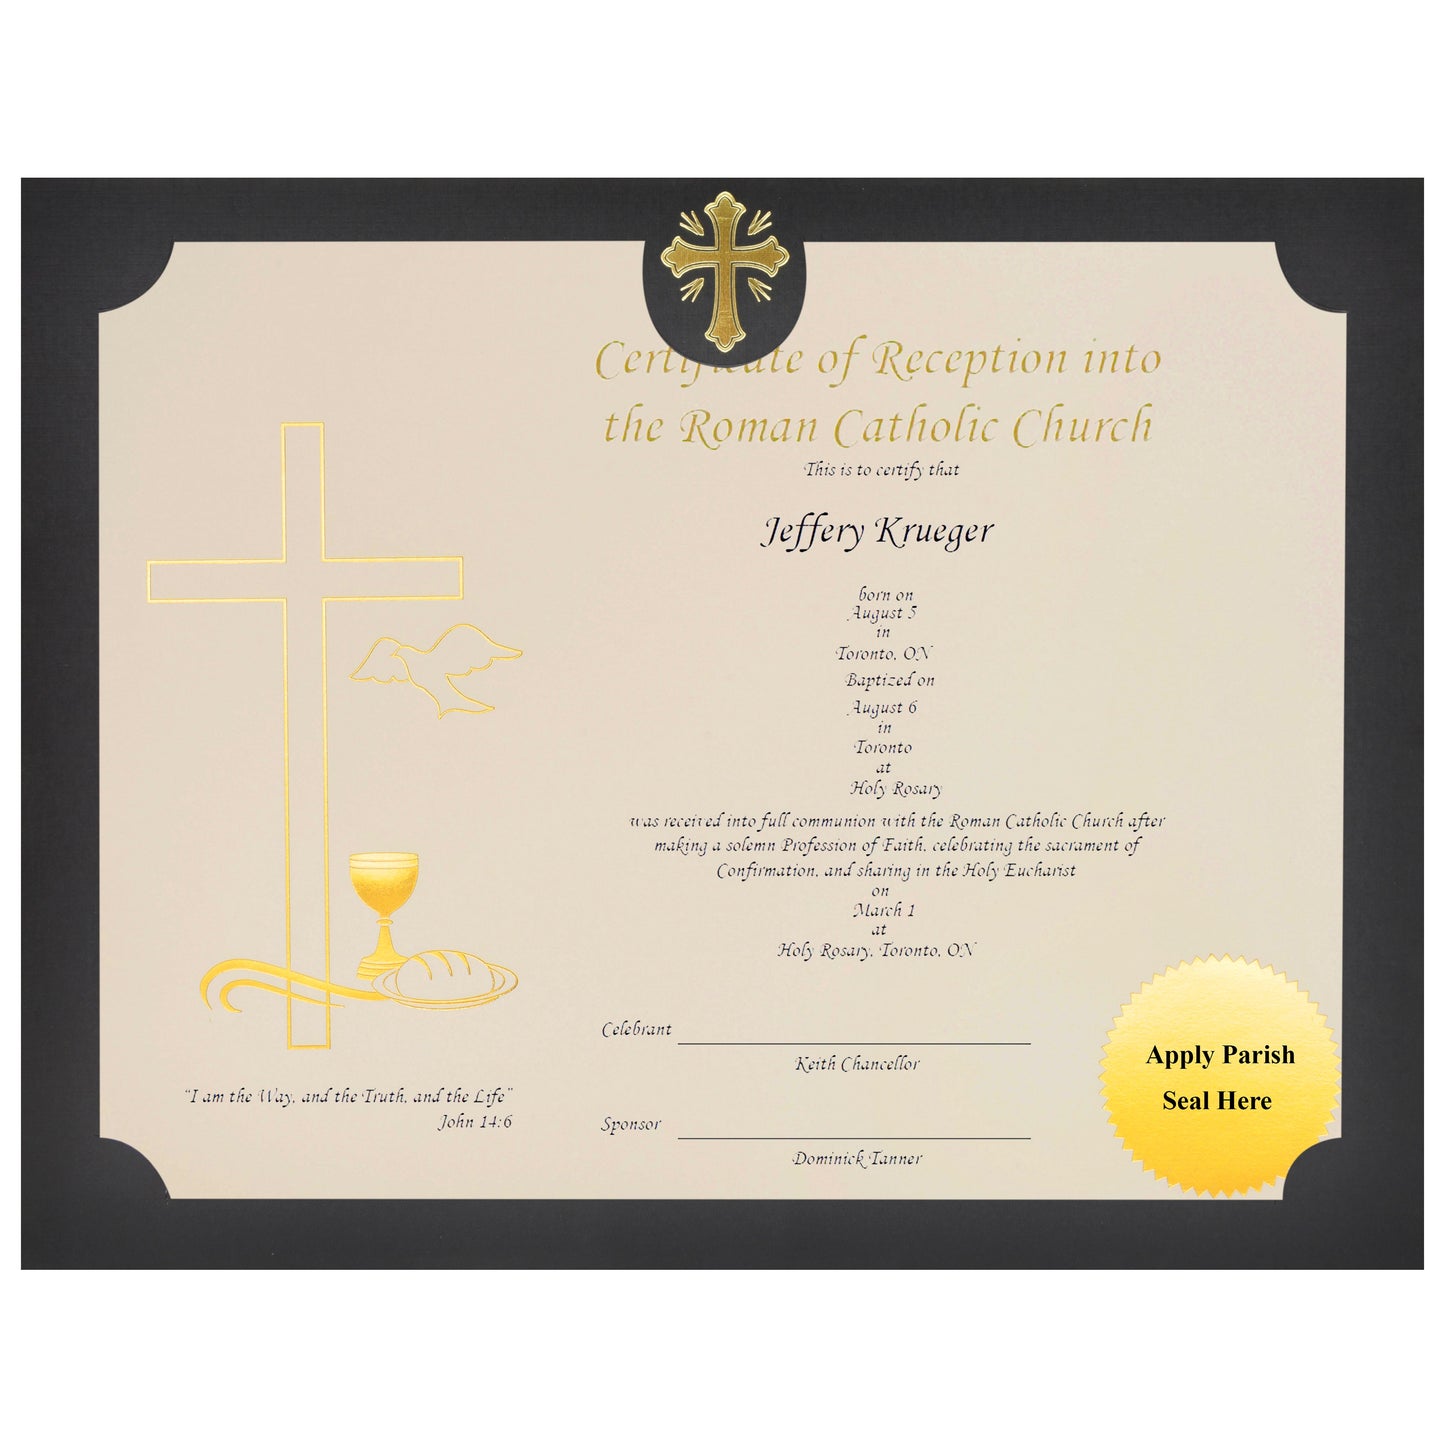 St. James® Religious Certificates - Reception into Church Certificates, 65 lb, Gold Foil, Ivory Card Stock, Pack of 50